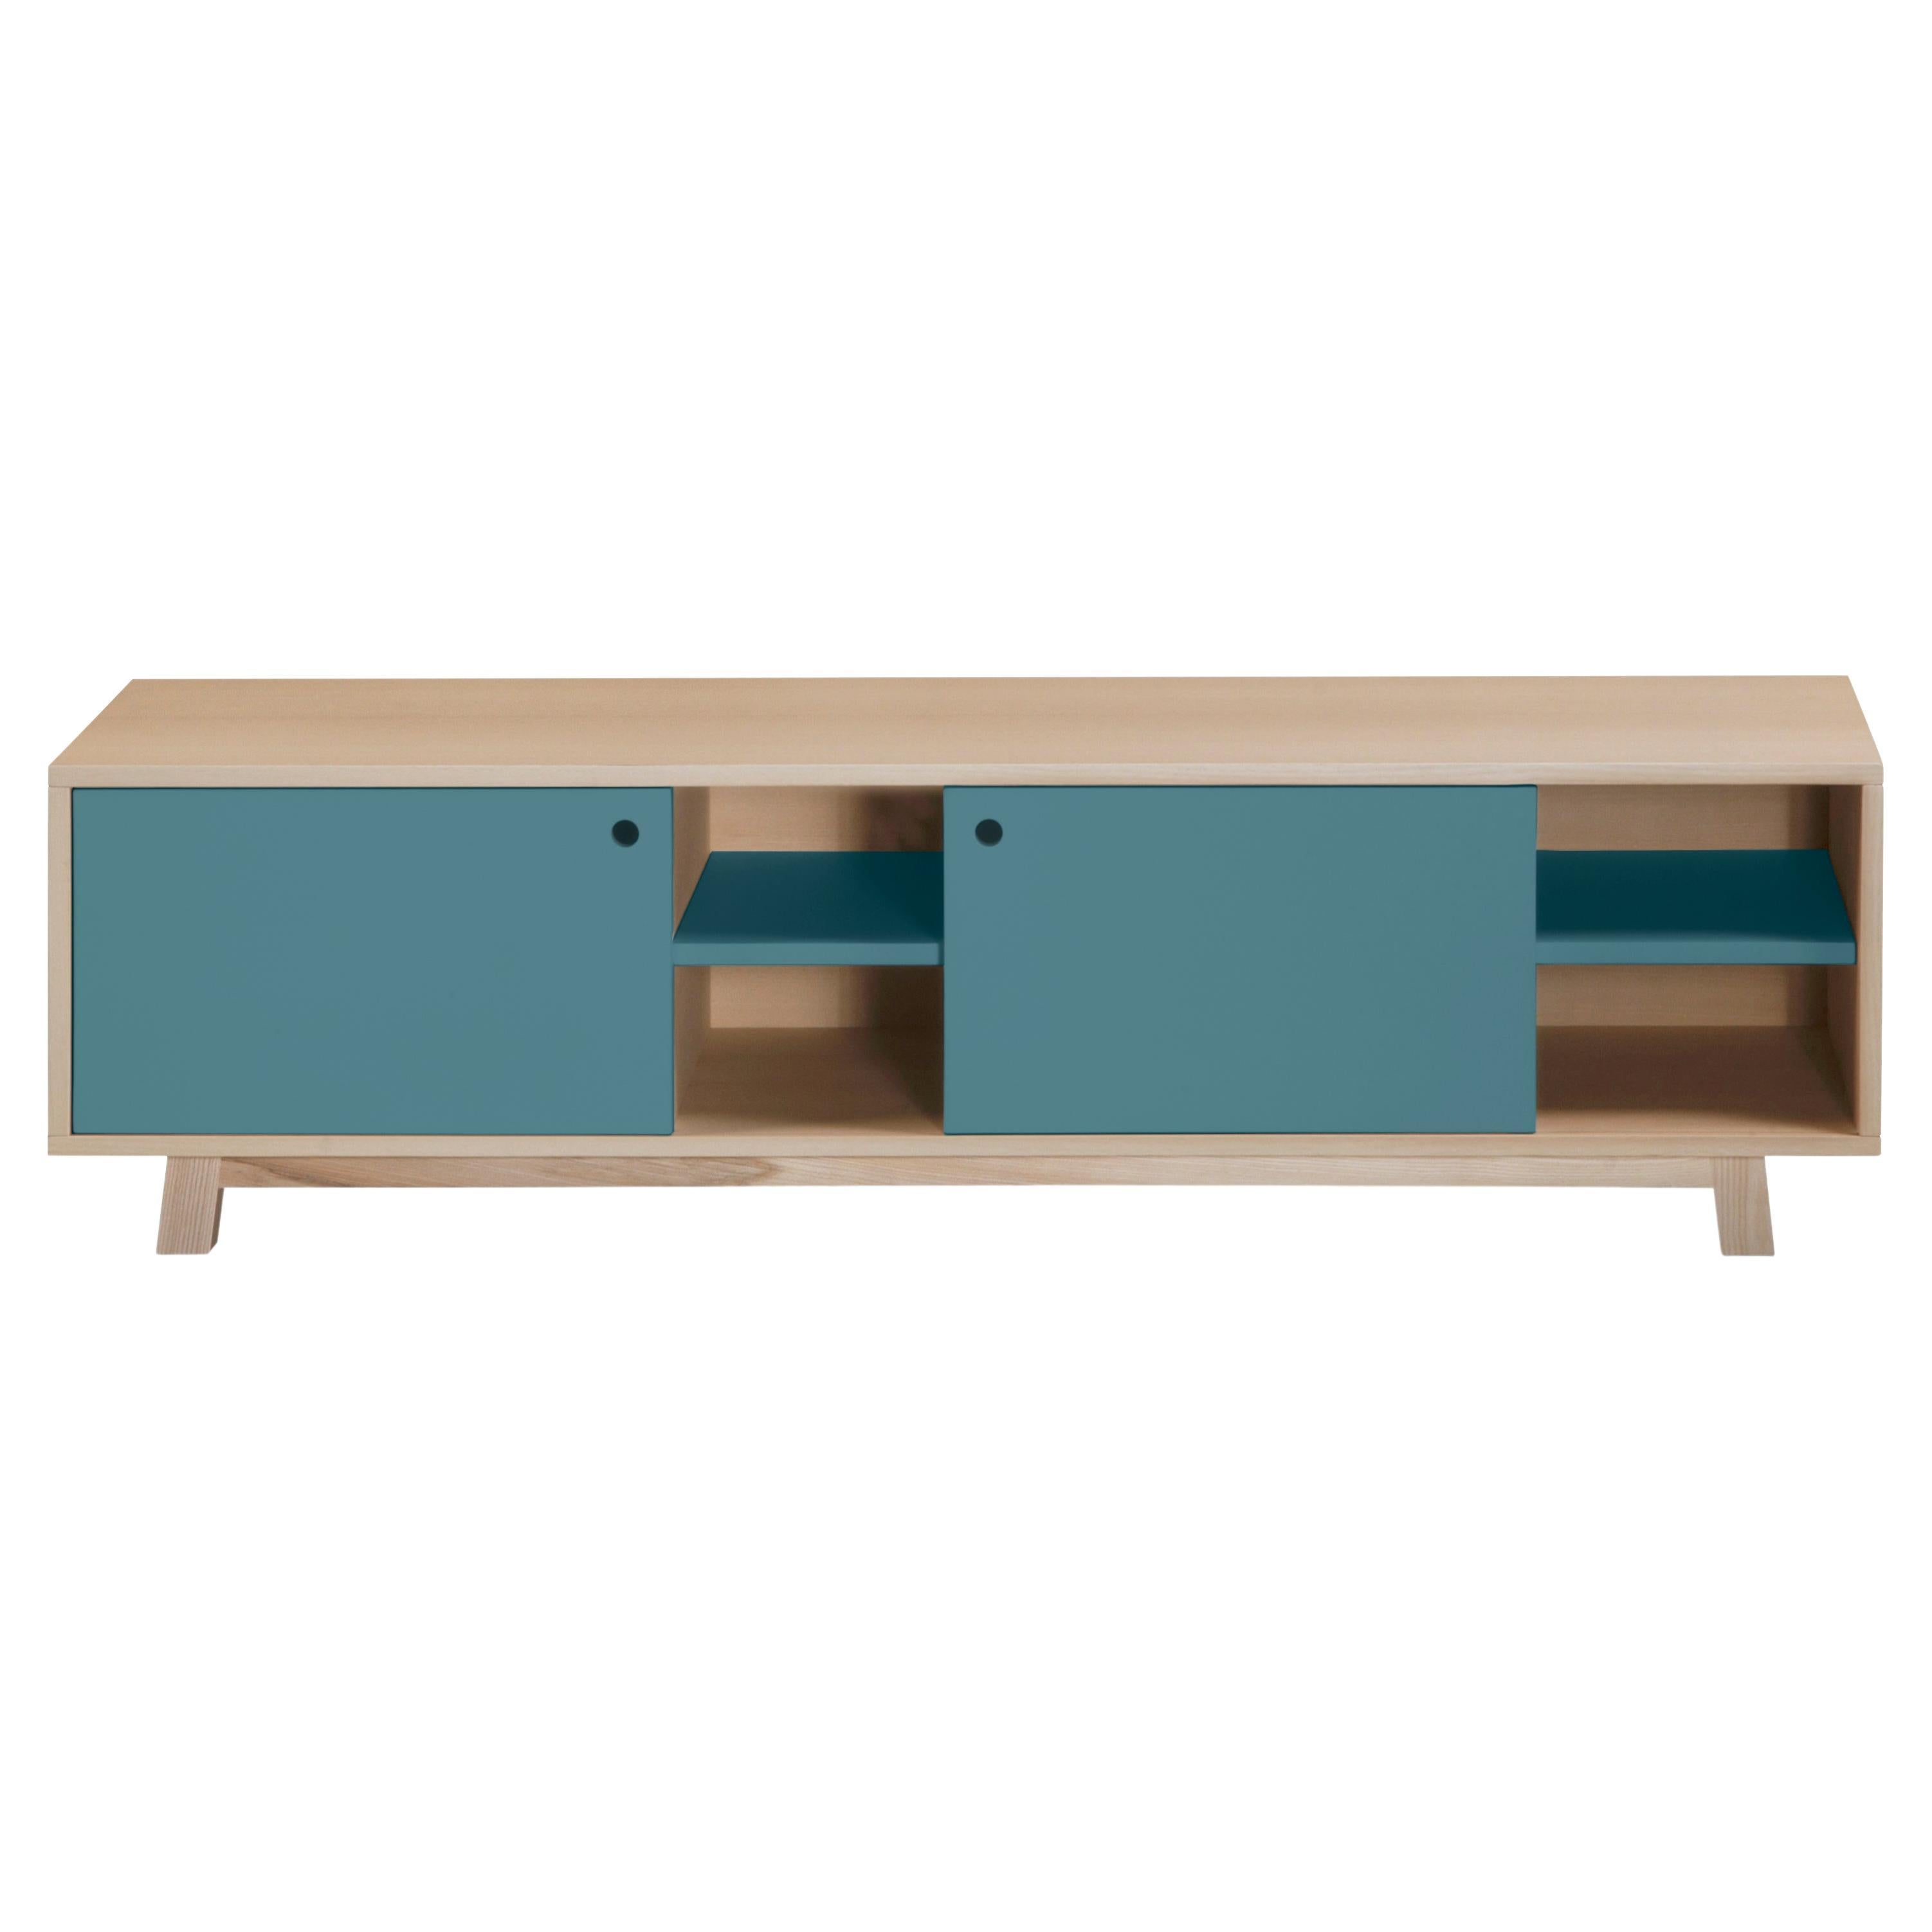 This TV stand with 2 sliding doors is designed by Eric Gizard - Paris.

It is 100% made in France with solid and veneer ash and lacquered MDF doors. 

To pull the door, use the round eyelet. 
2 adjustable wooden shelves on cleats are placed